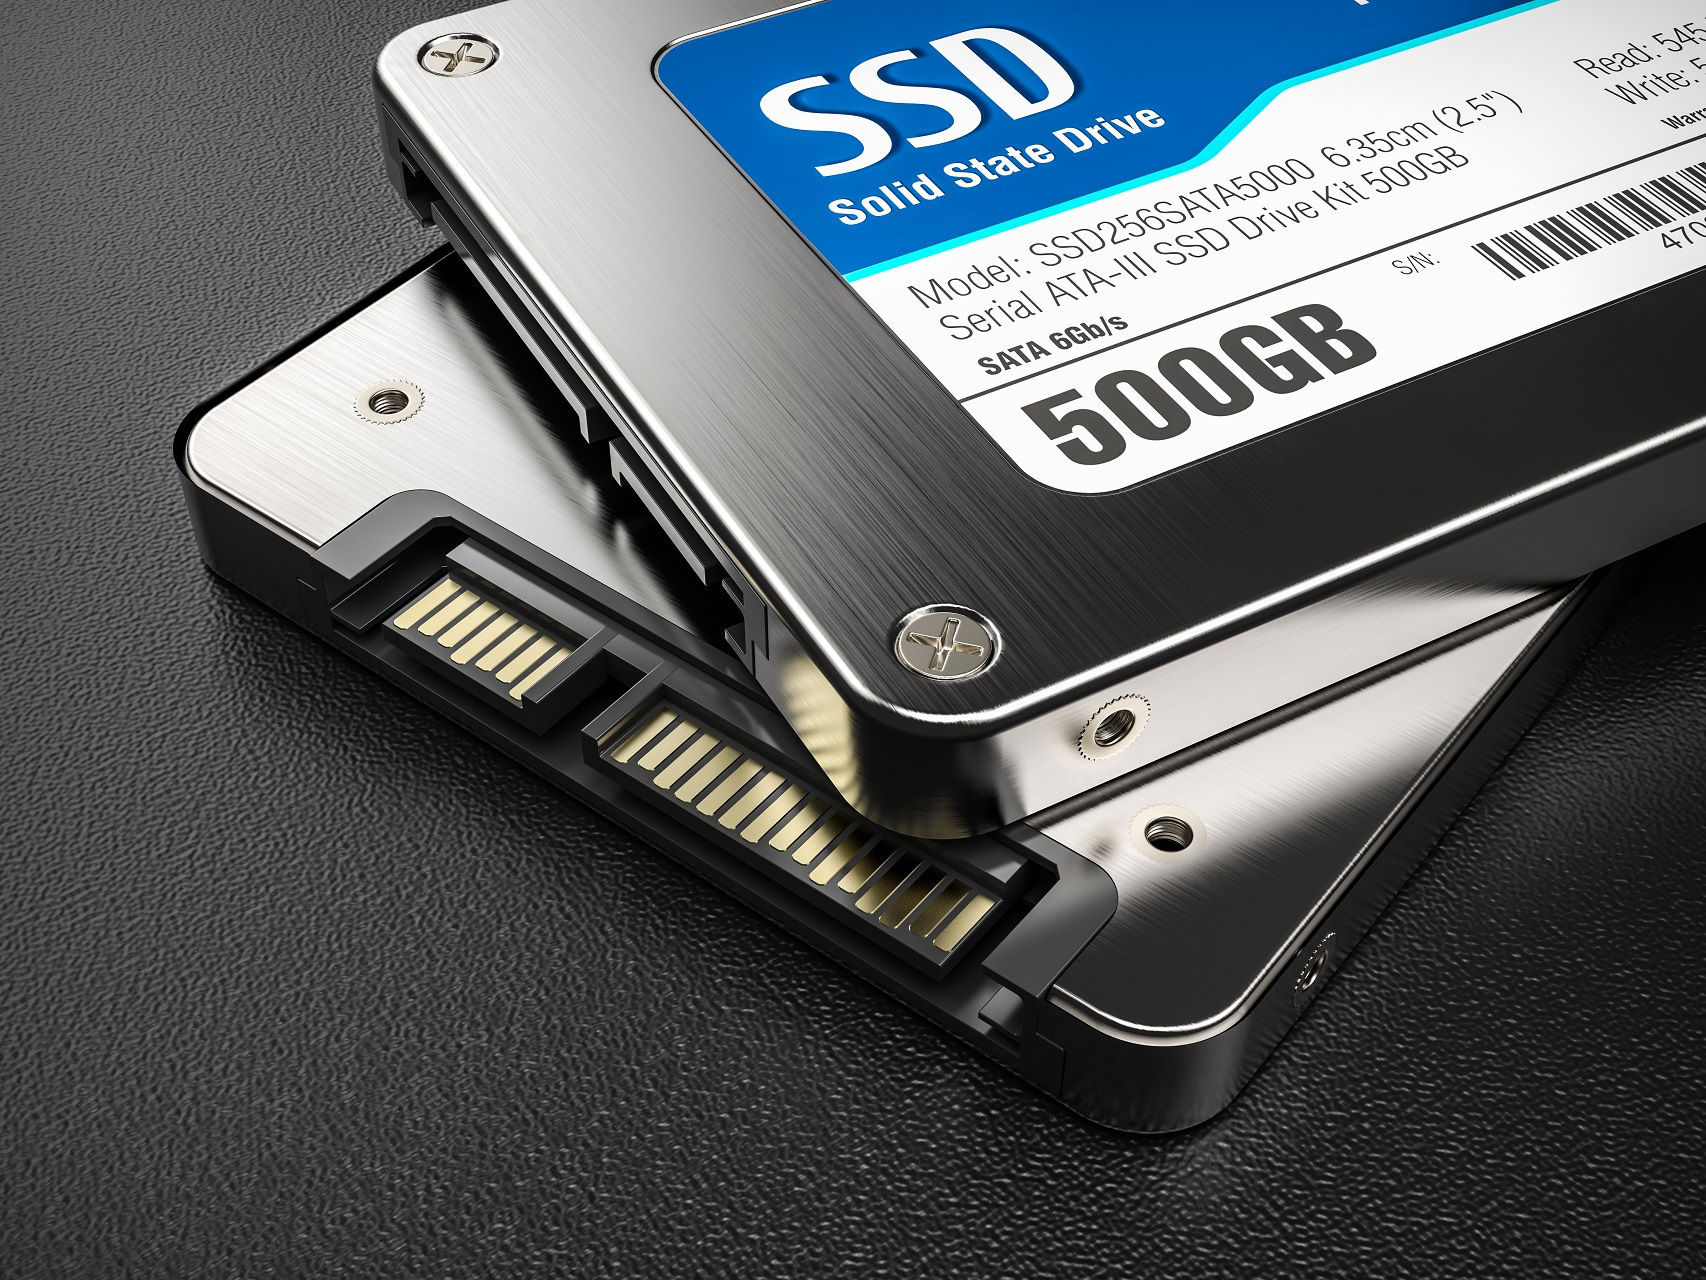 What do if you install Windows on SSD [FIX]